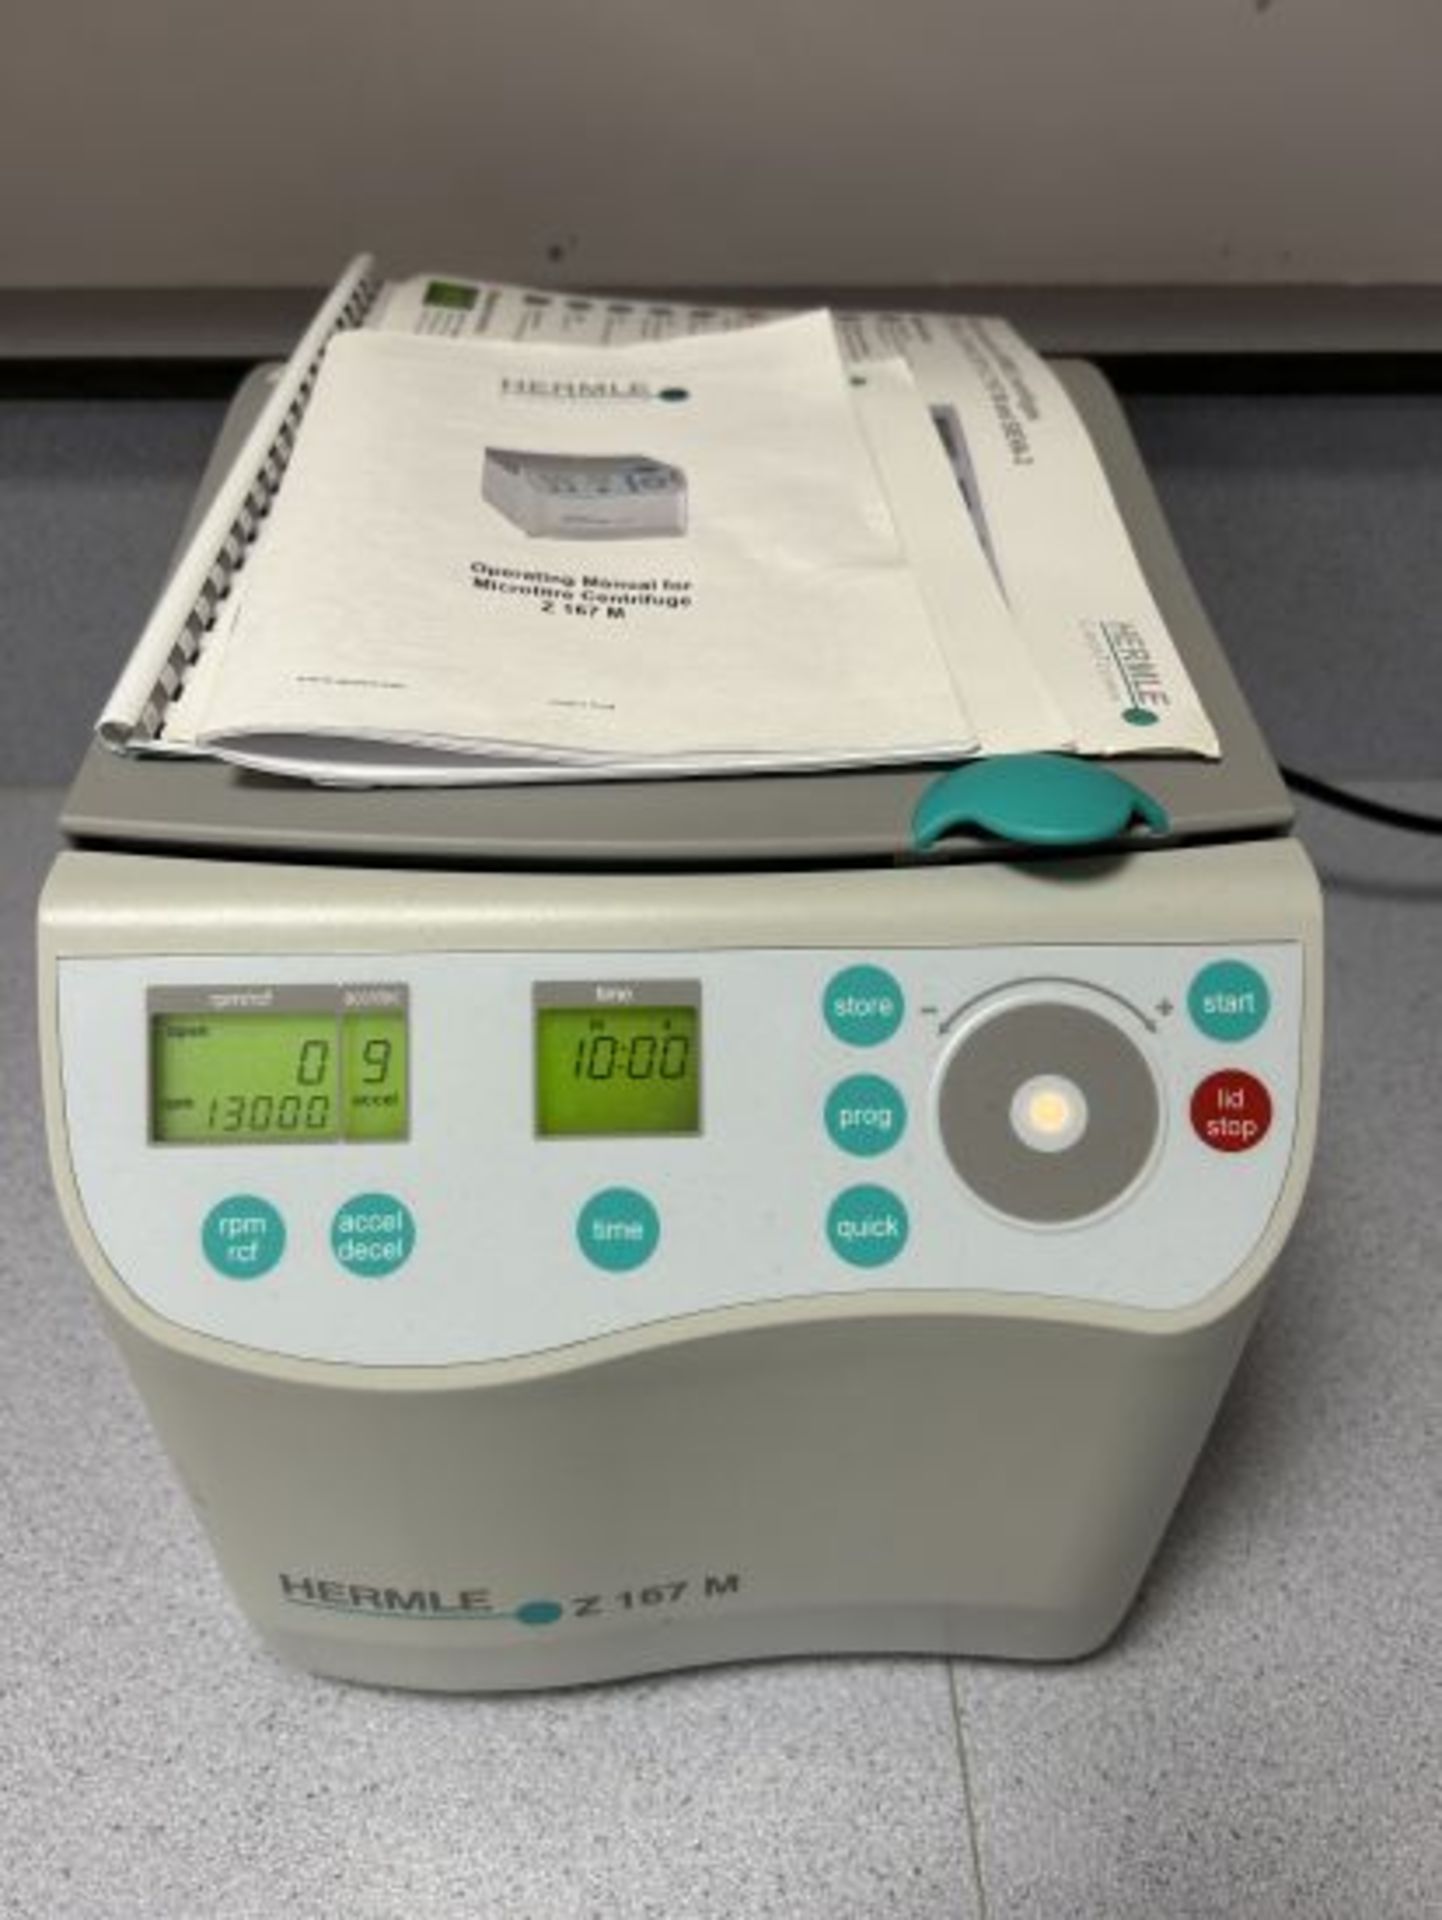 2019, Hermle Z167M Microlite Centrifuge, with Manuals, Single Phase, Serial No 1091900023.